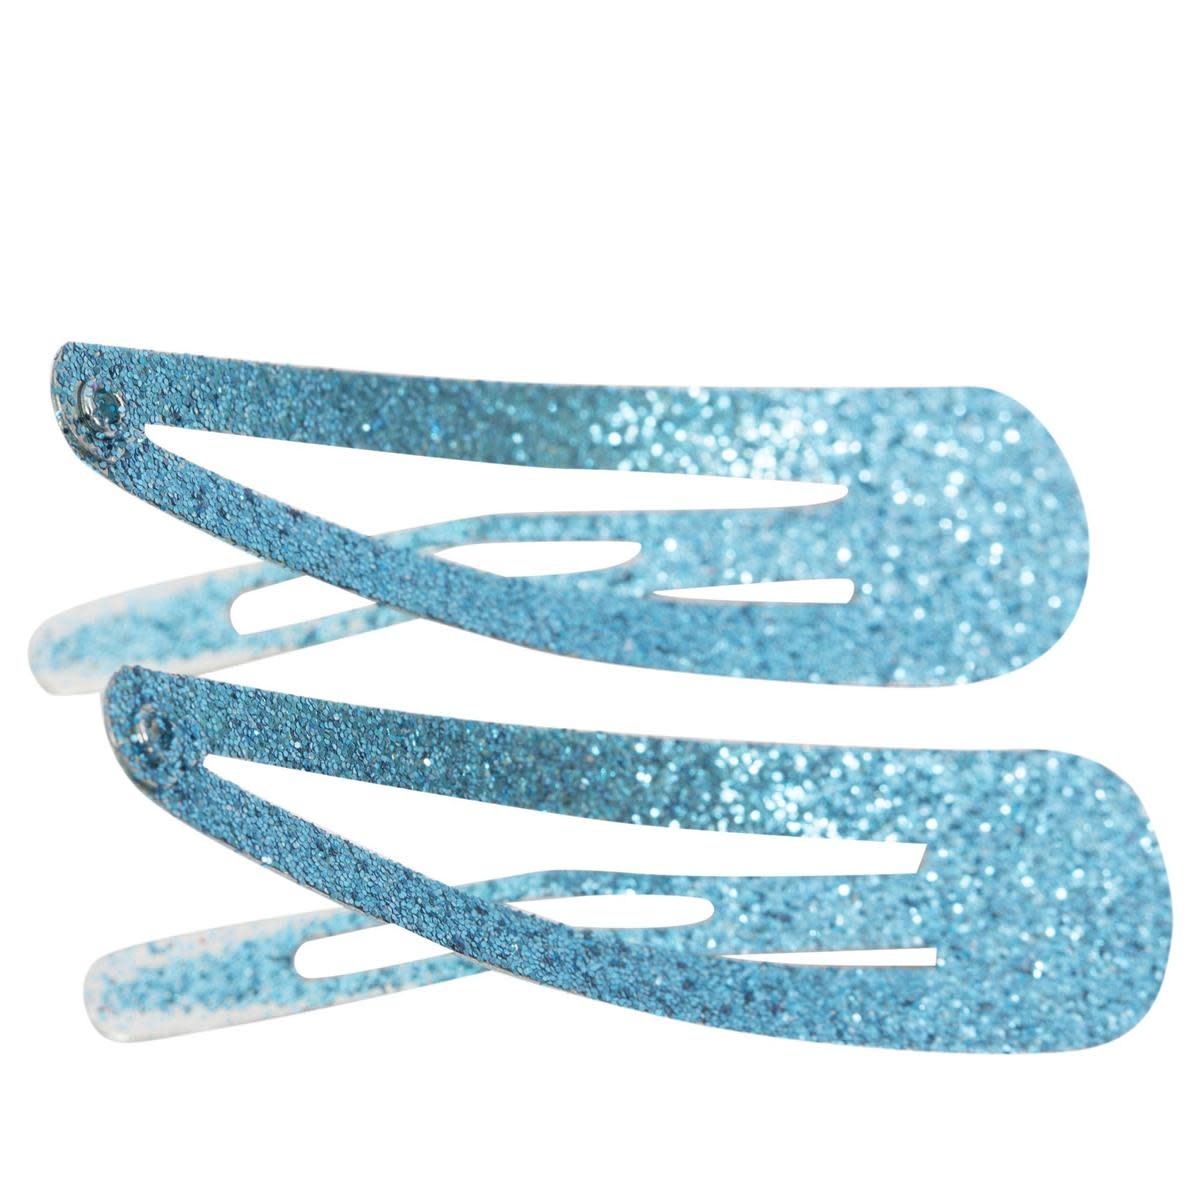 Barrettes, Stylin 76008, package of 8